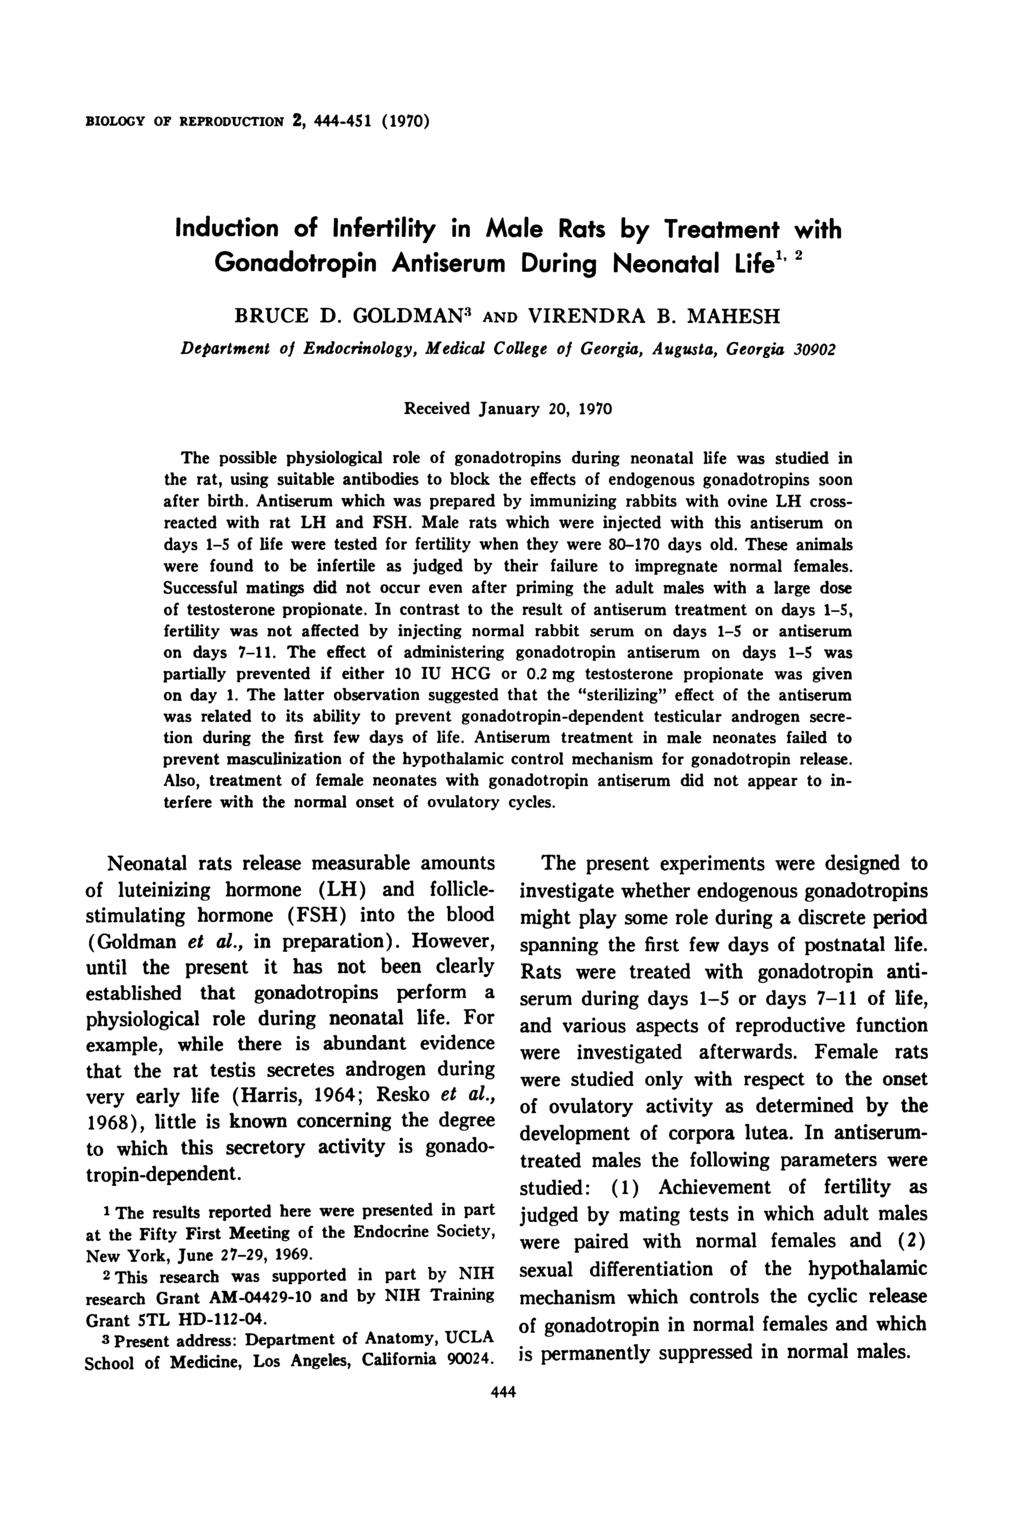 BIOLOGY OF REPRODUTION 2, 444-45 1 (1970) Induction of Infertility in Male Rats by Treatment with Gonadotropin Antiserum During Neonatal Life1 2 BRUE D. GOLDMAN1 AND VIRENDRA B.